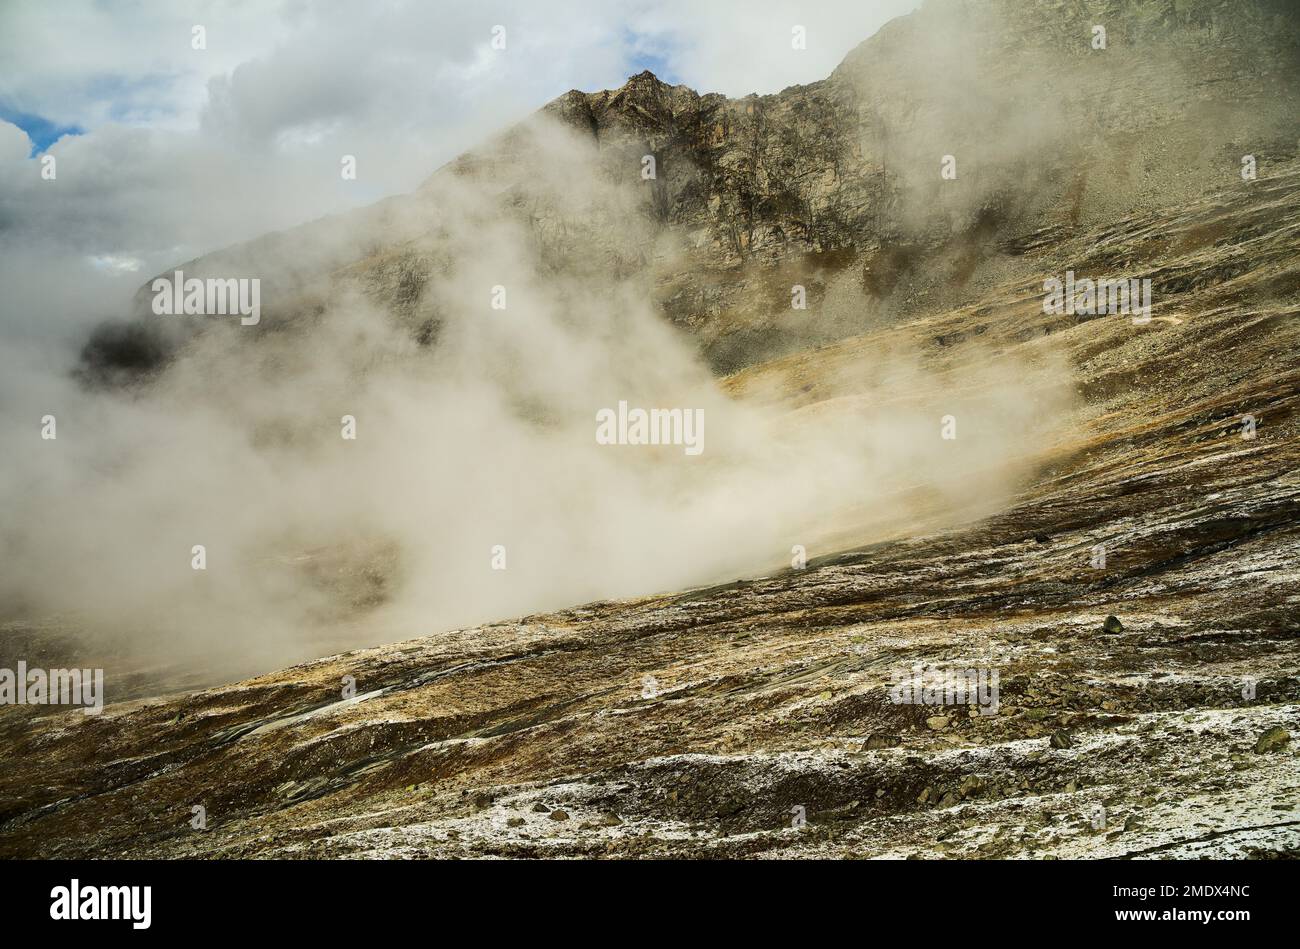 The hot steam and geysers coming out of a mountain with the cloudy sky in the background Stock Photo